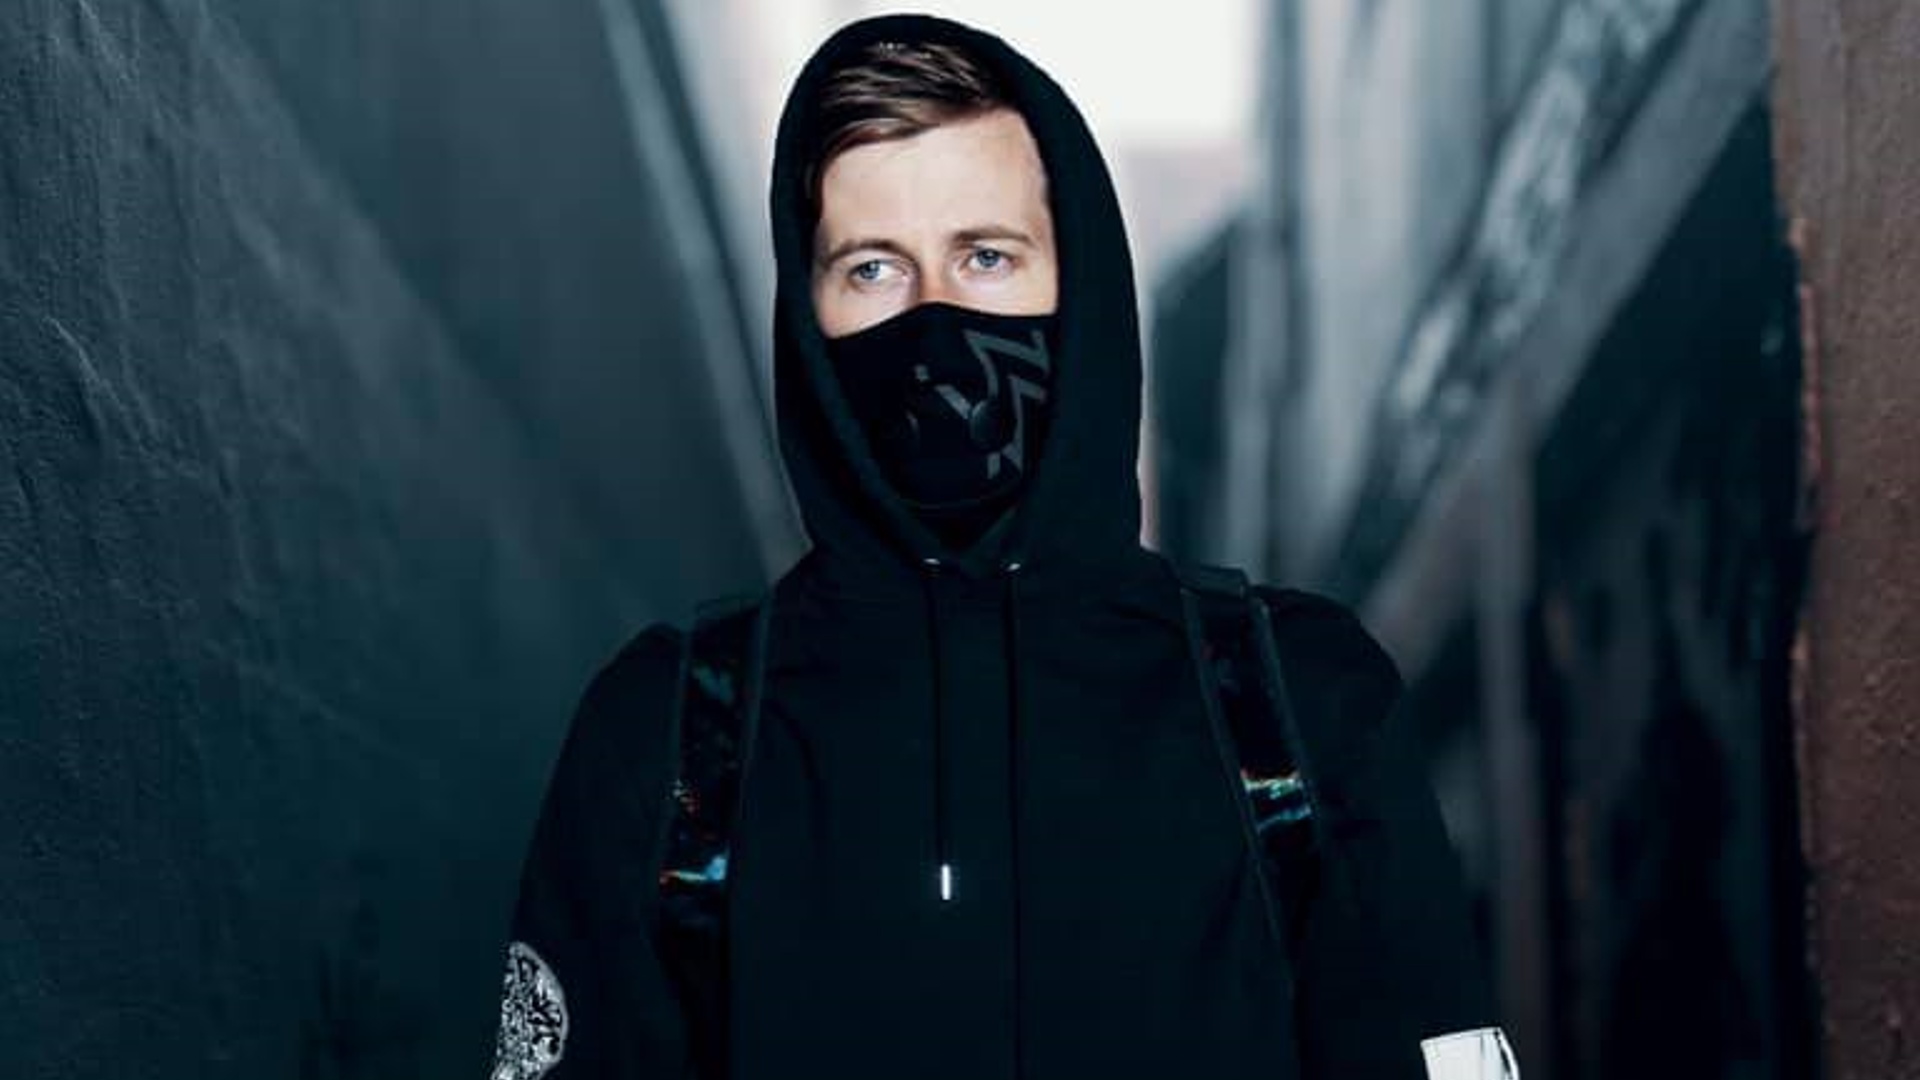 Alan Walker invites those who dare to participate in his new music